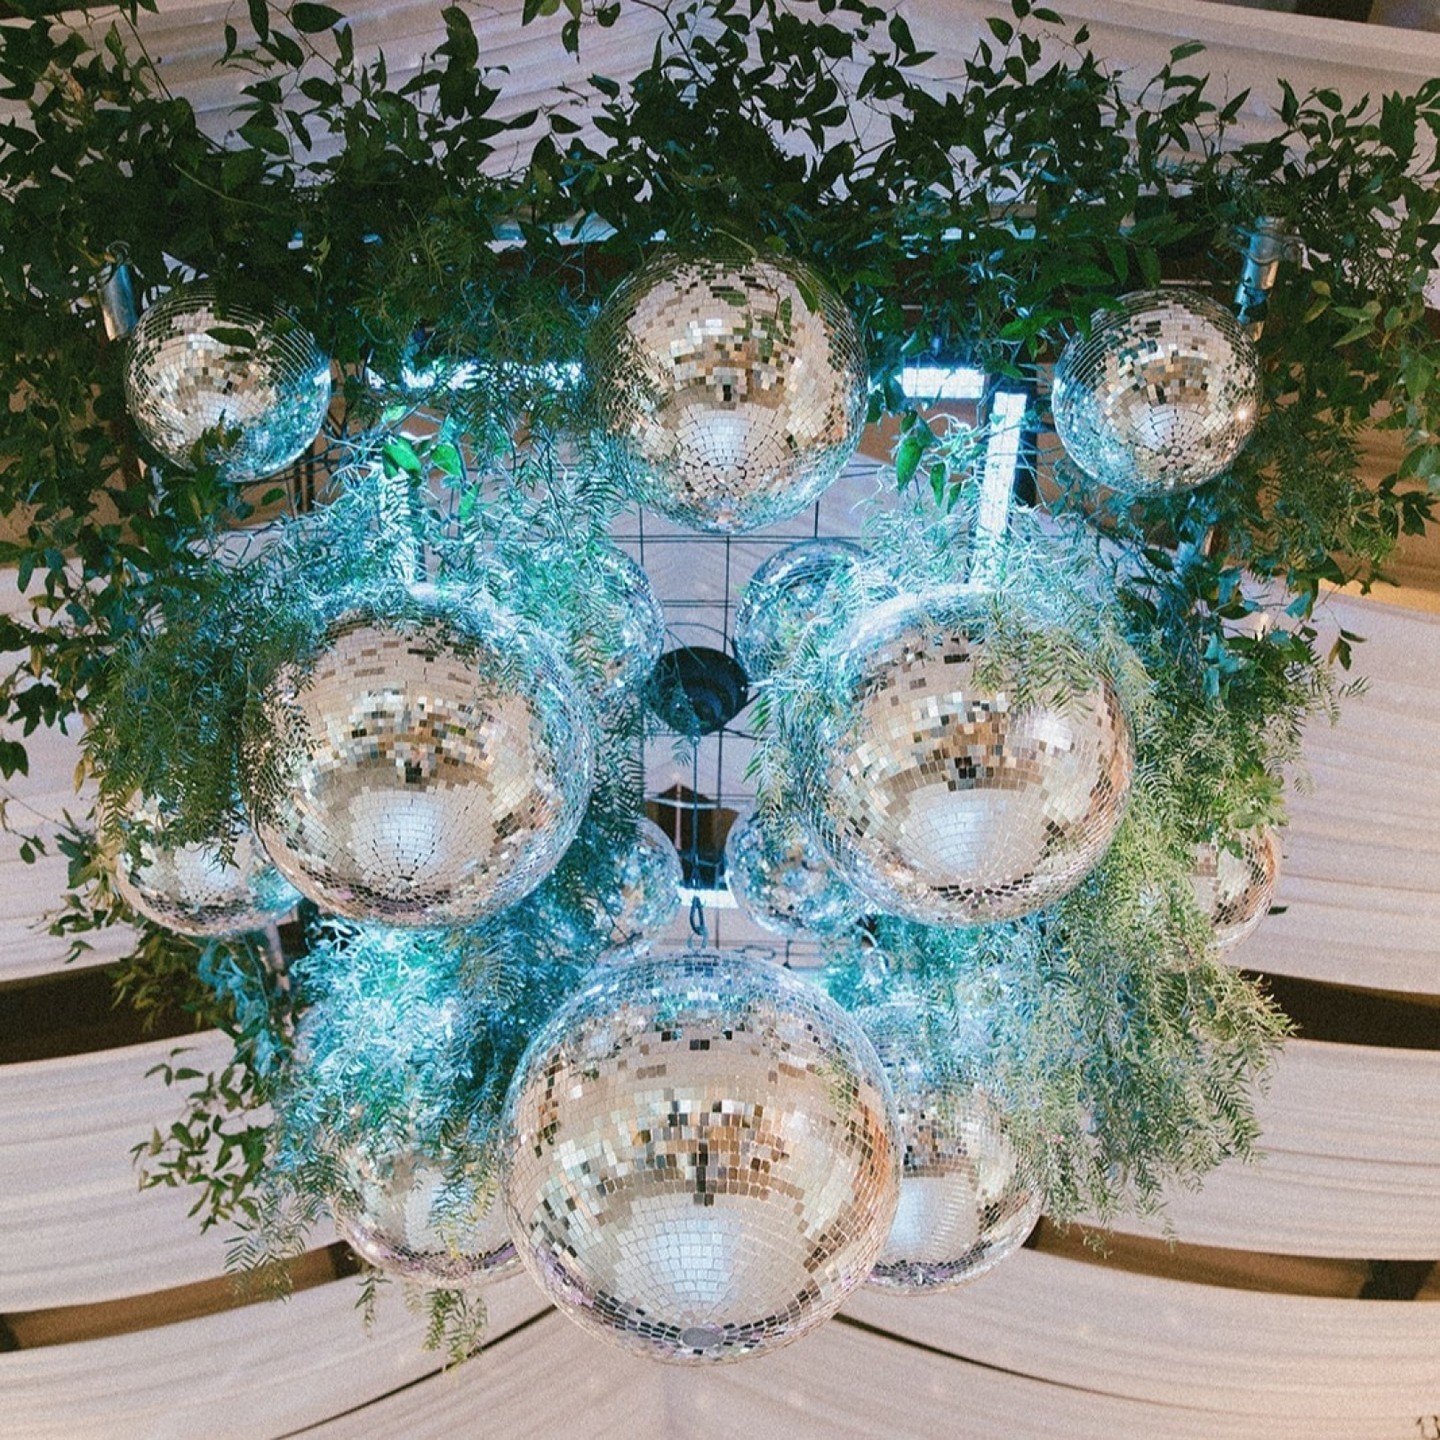 When your couple loves a disco ball, you build a disco ball chandelier in the ceiling complete with greenery. 🪩✨🌿

It's only been a little over a month and I miss Stephanie &amp; Andrew already 🥺

Vendors:
Wedding Planning &amp; Design @eventsbywc